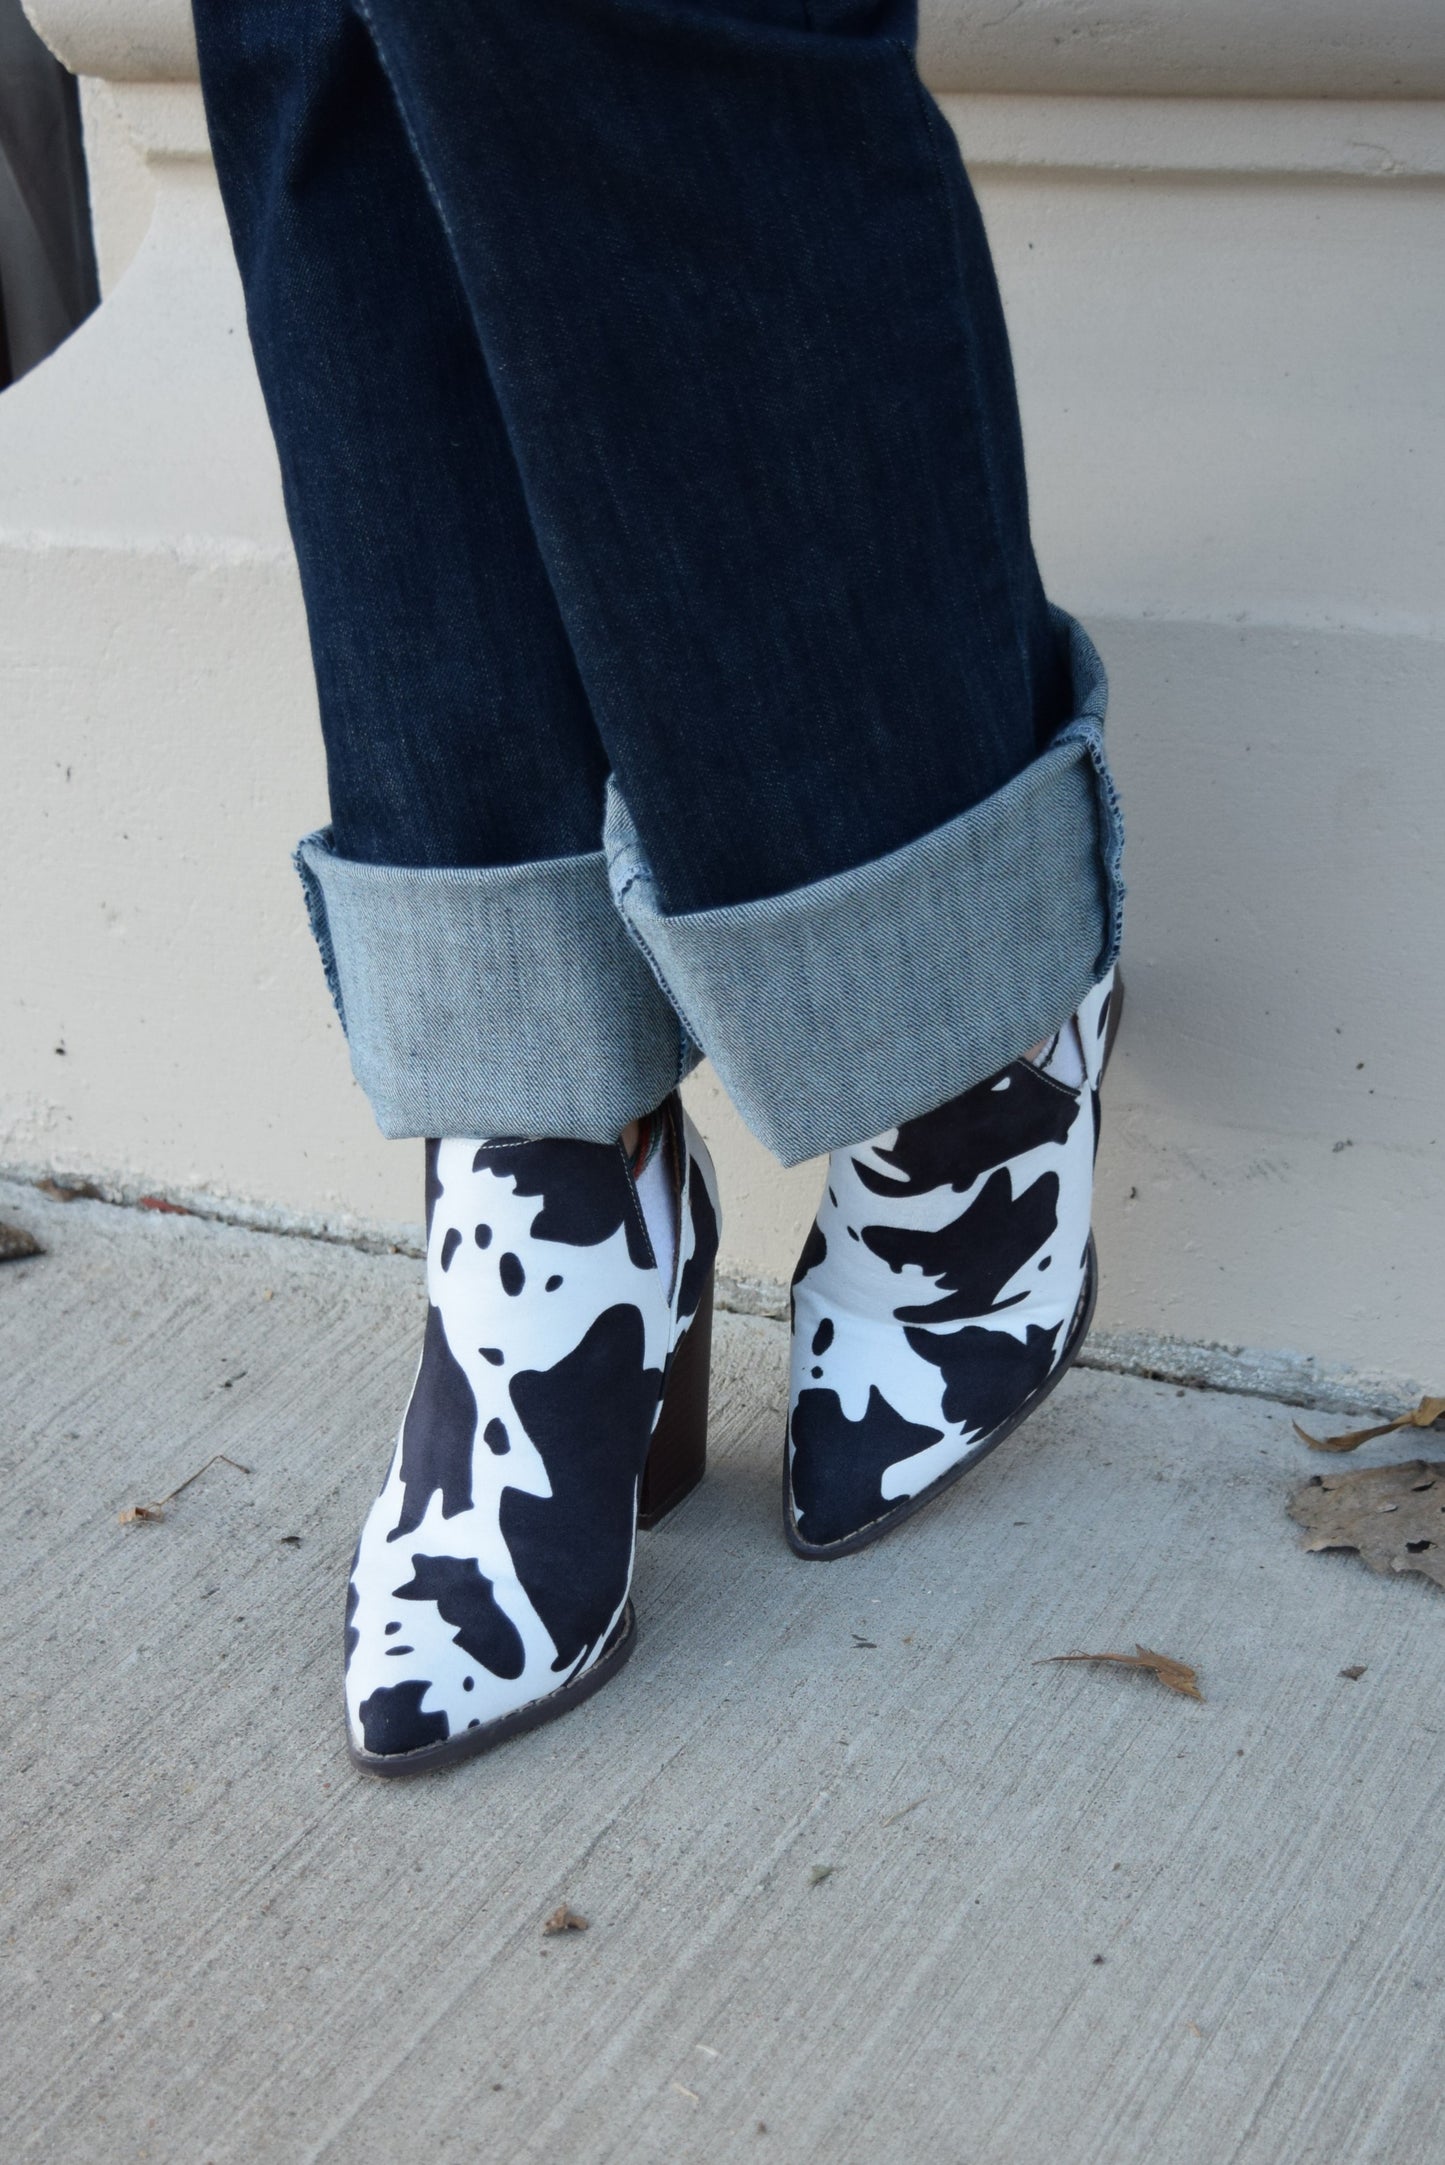 The Calloway Cowprint Booties